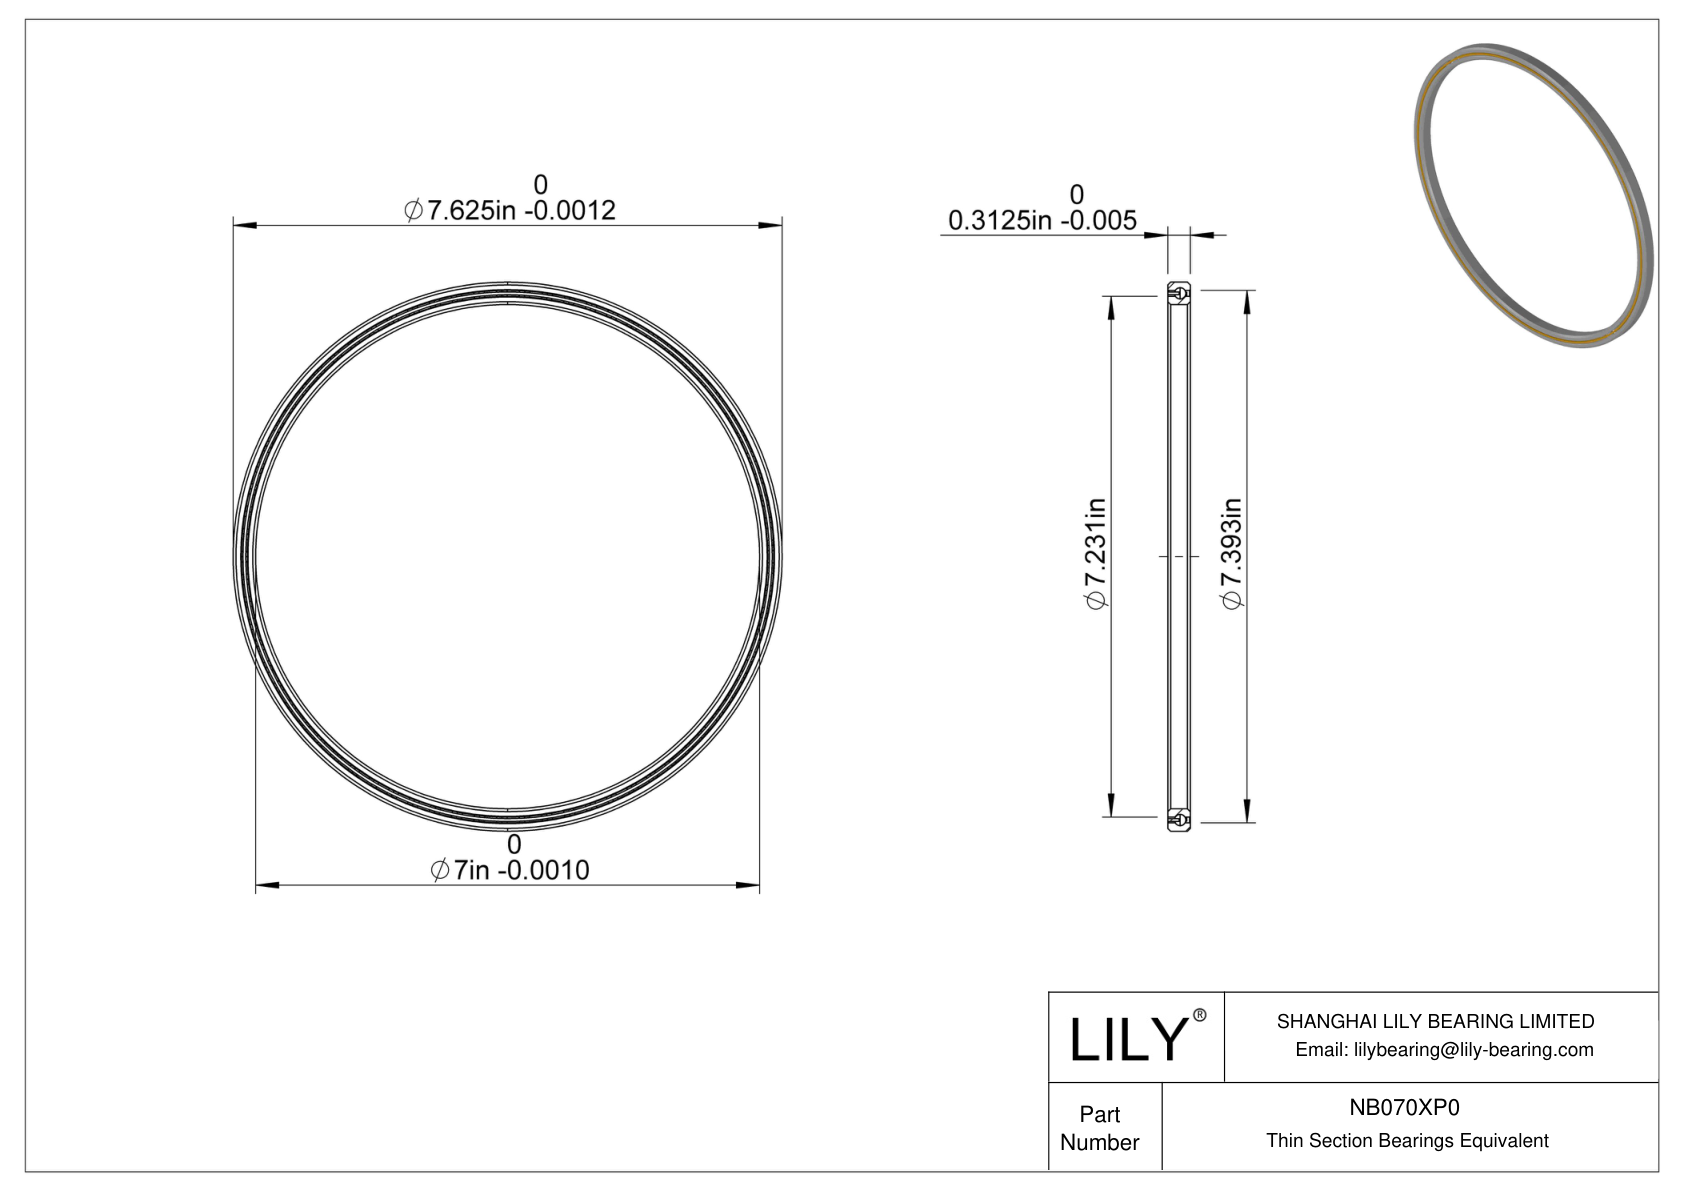 NB070XP0 Constant Section (CS) Bearings cad drawing